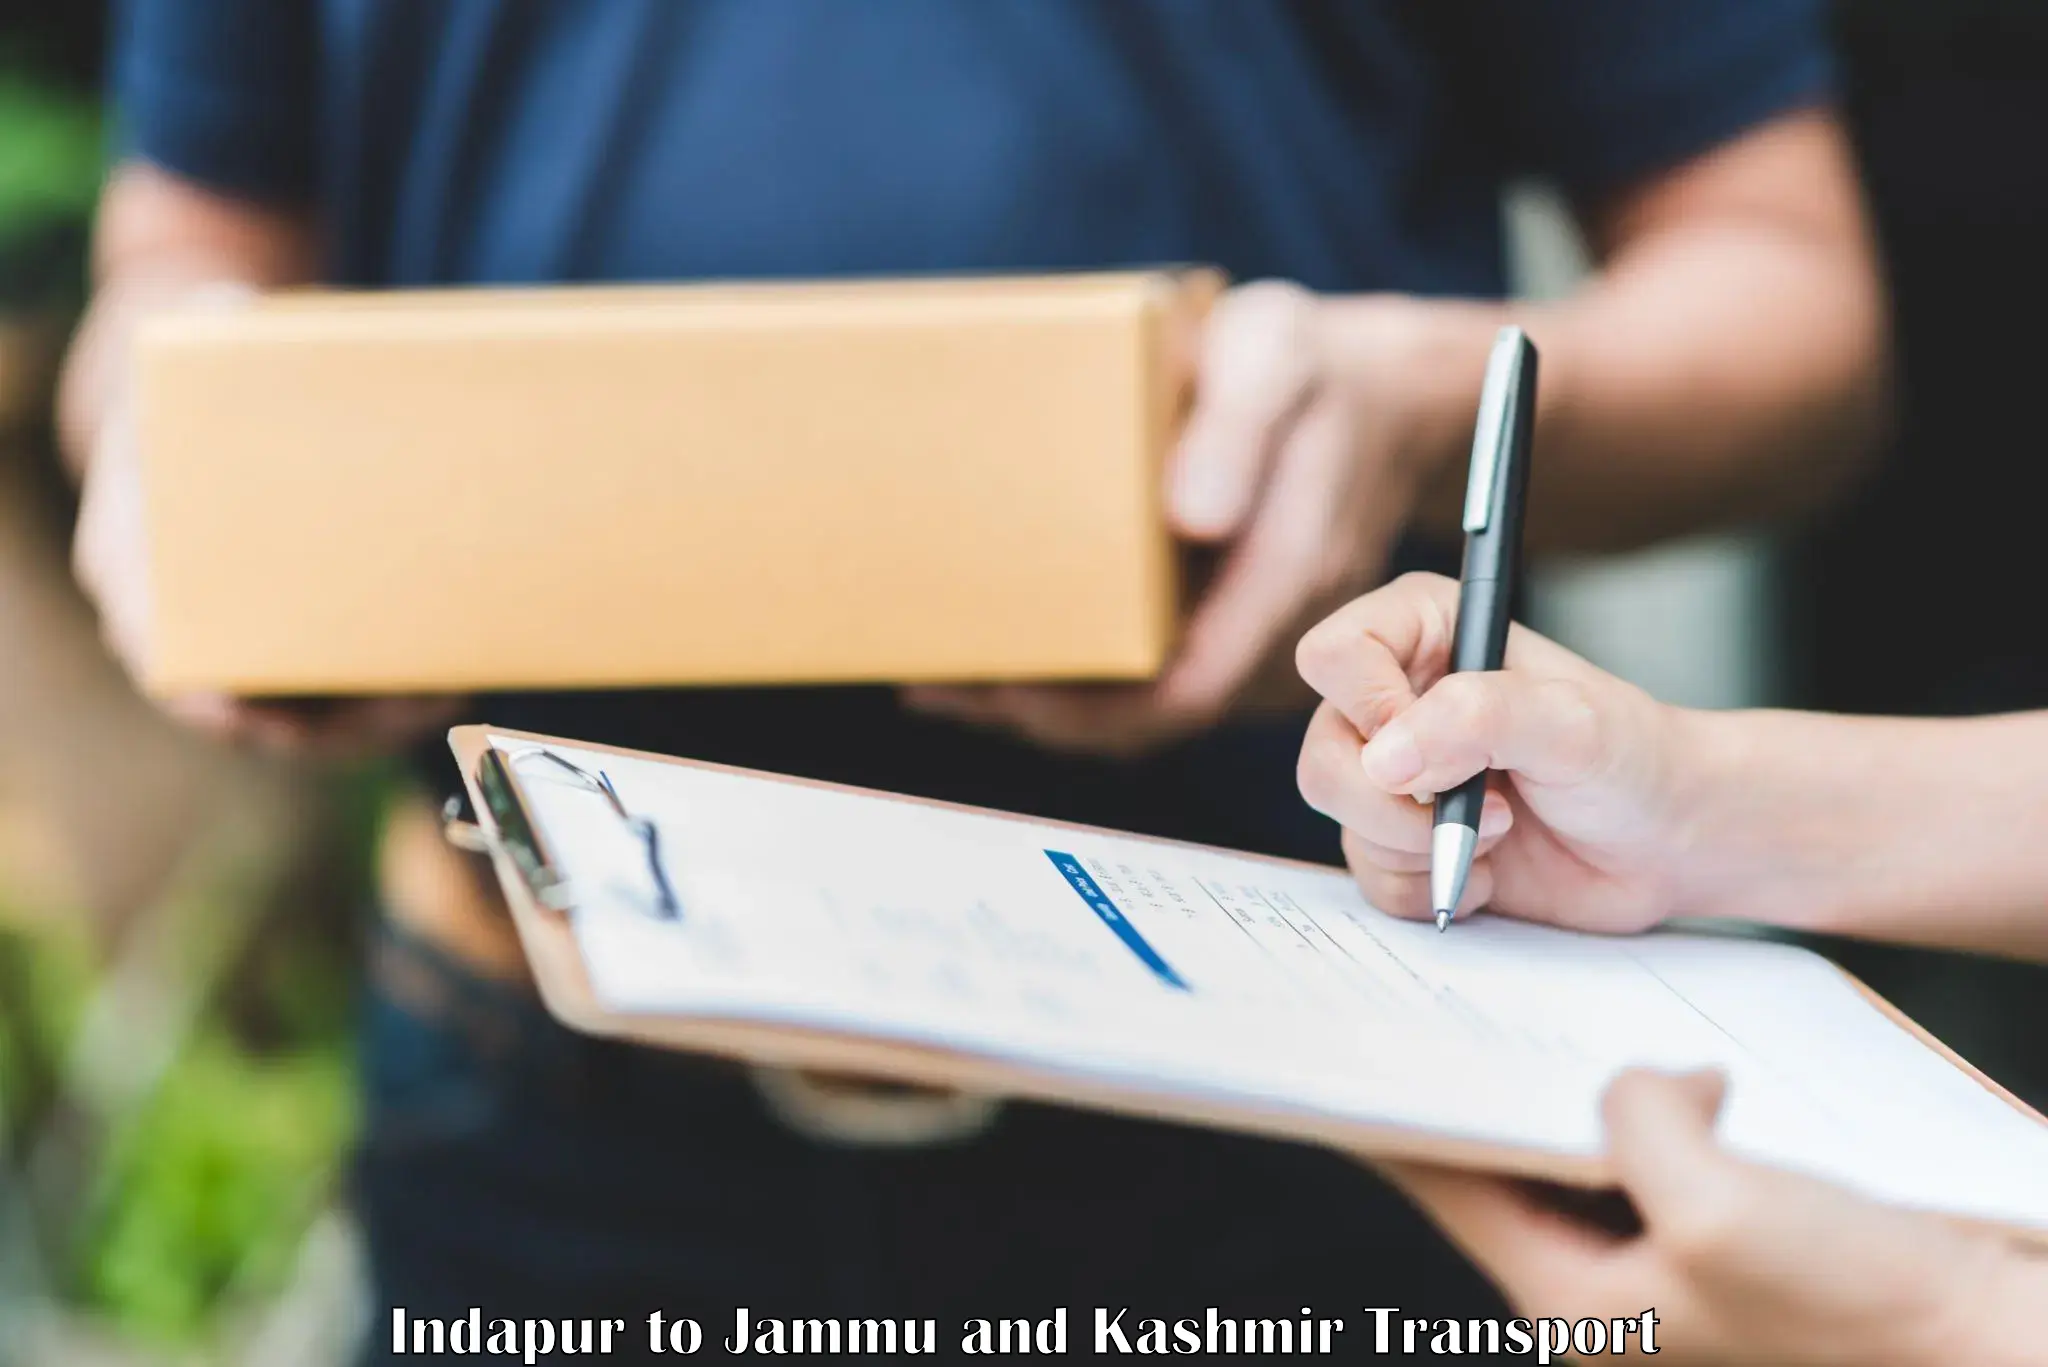 Domestic goods transportation services Indapur to Jammu and Kashmir